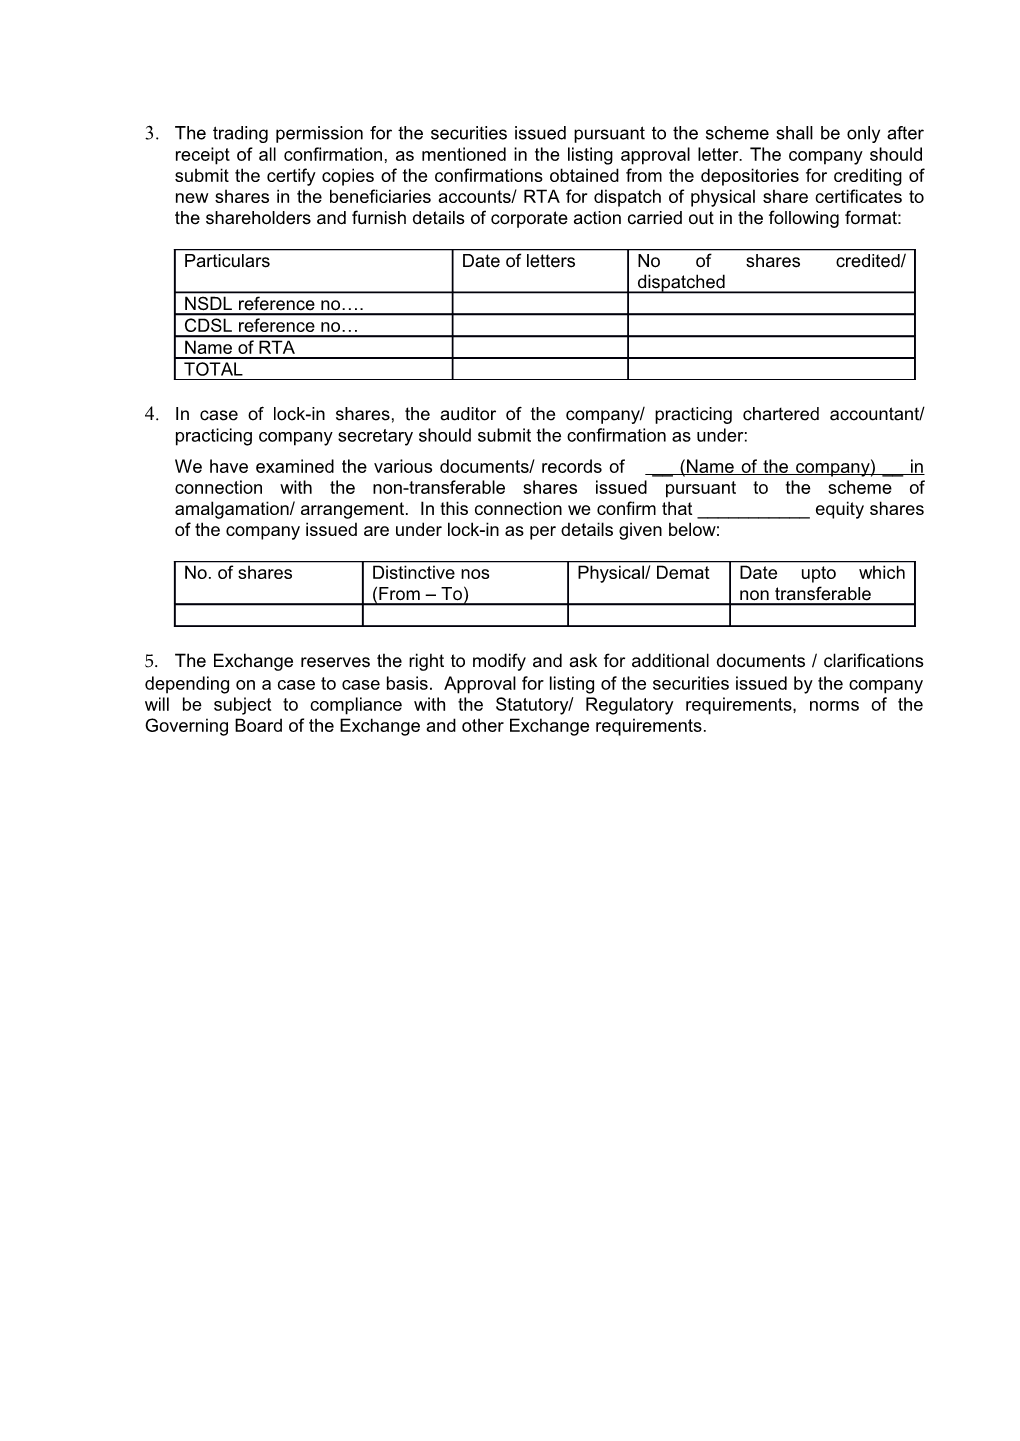 Documents Required for Listing of New Securities Issued Pursuant to the Scheme of Amalgamation